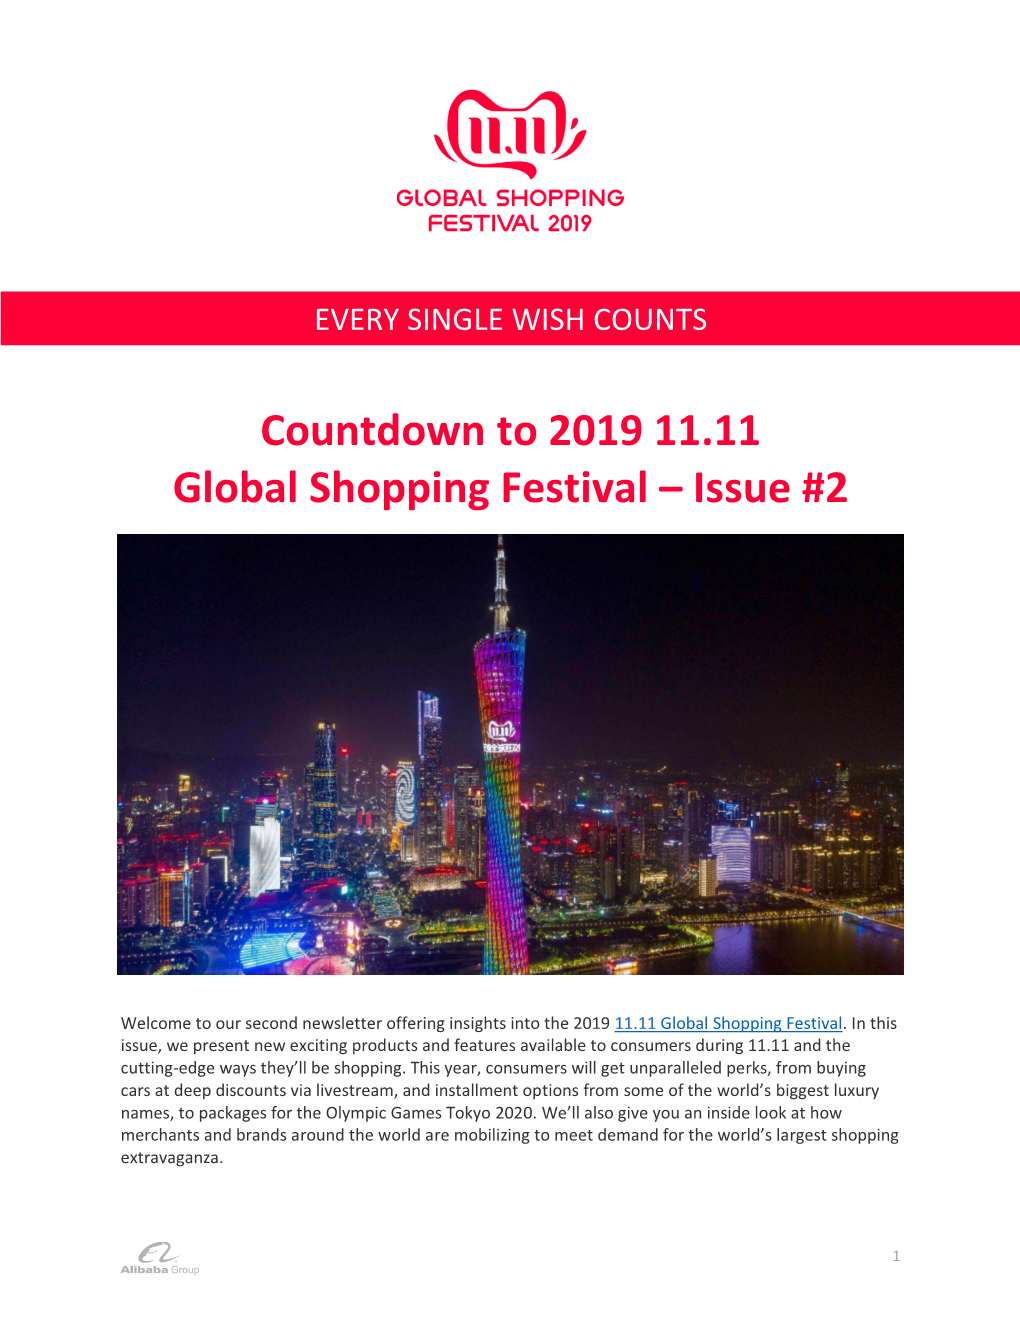 Countdown to 2019 11.11 Global Shopping Festival – Issue #2